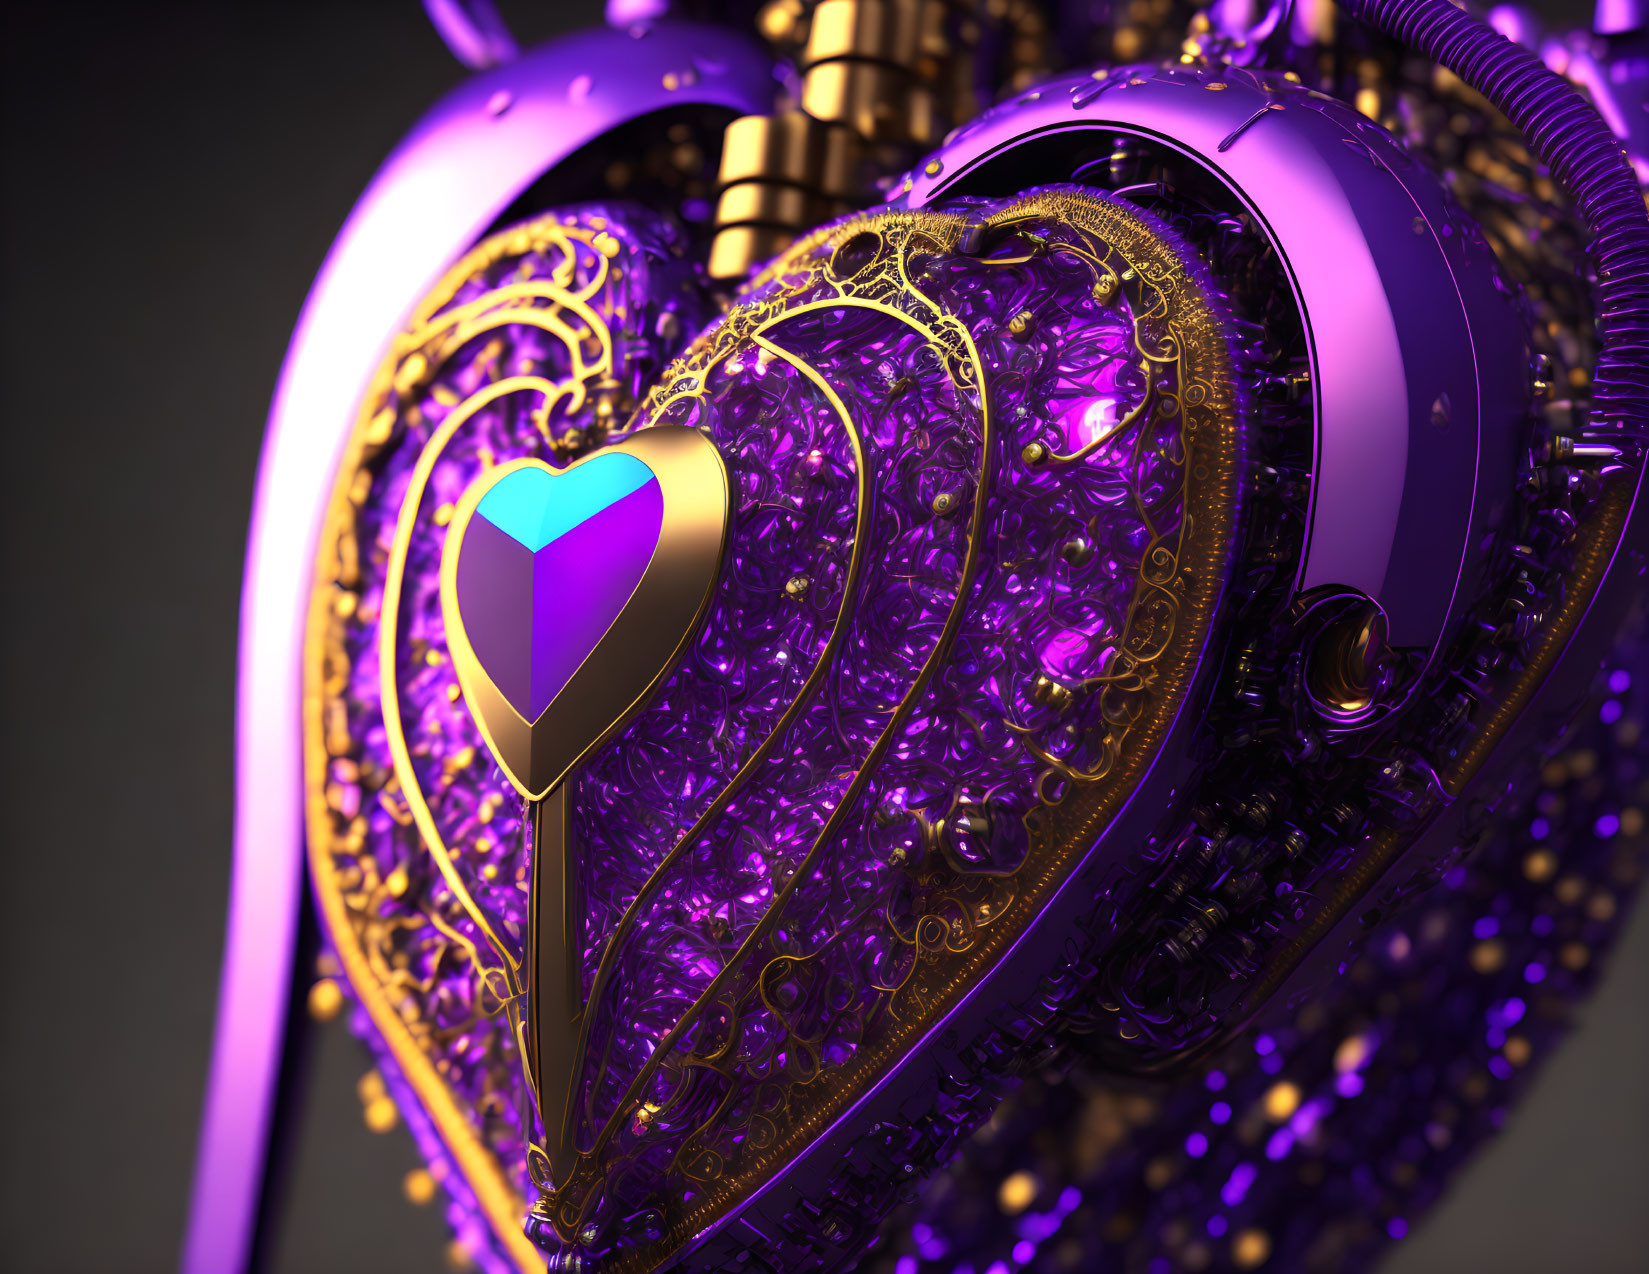 Detailed Metallic Heart with Intricate Patterns and Iridescent Center